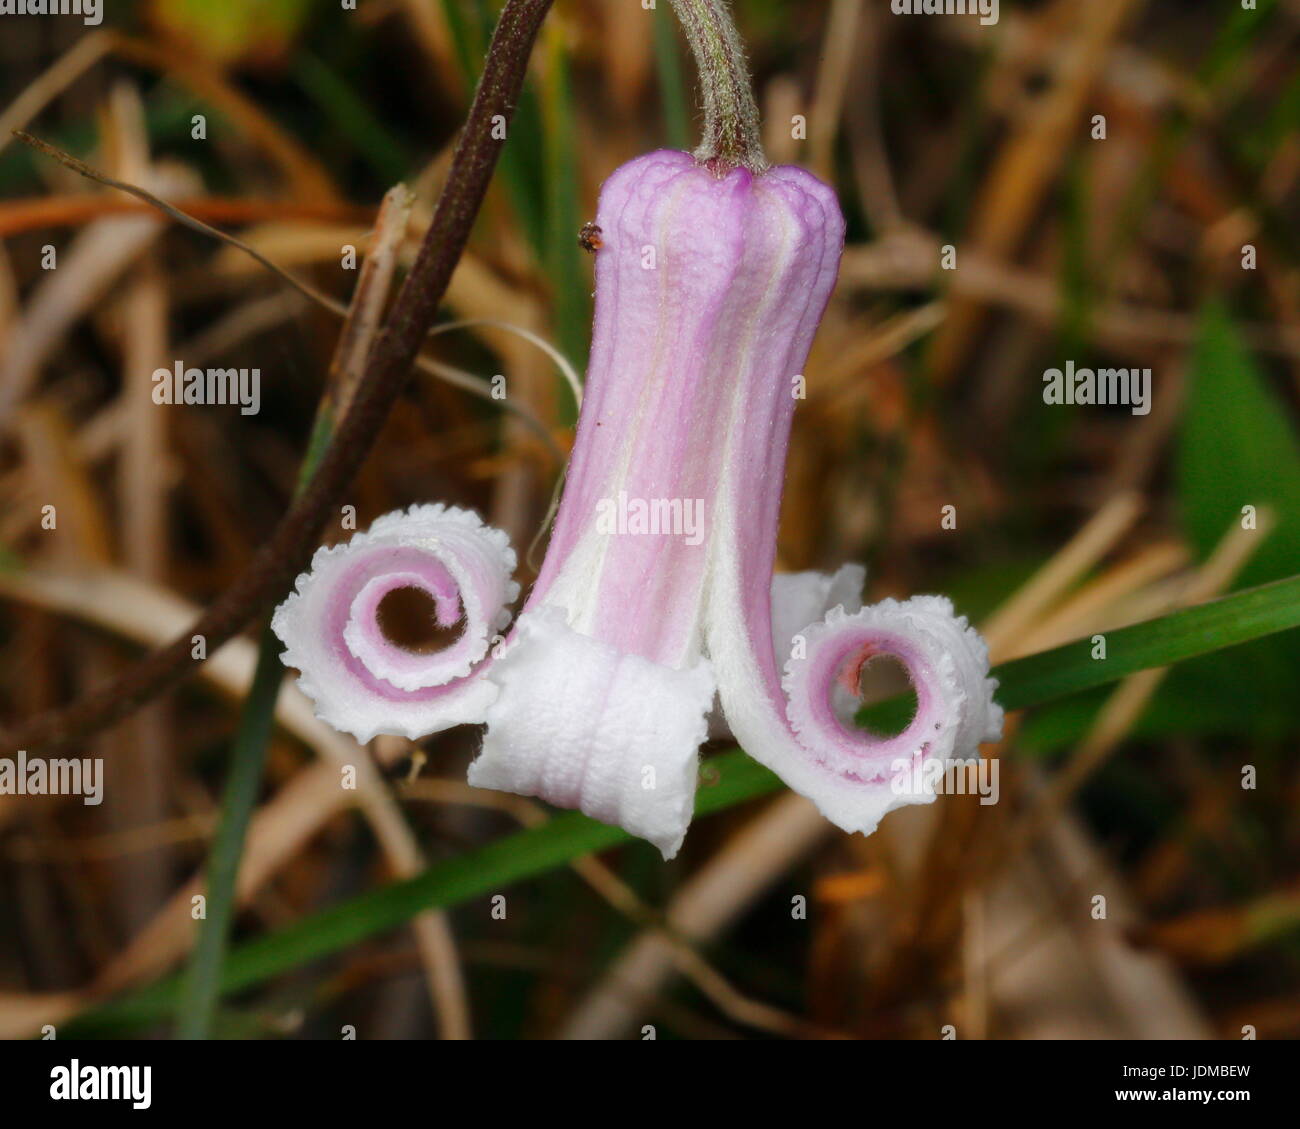 Close up of a swamp leaher flower, Clematis crispa. Stock Photo